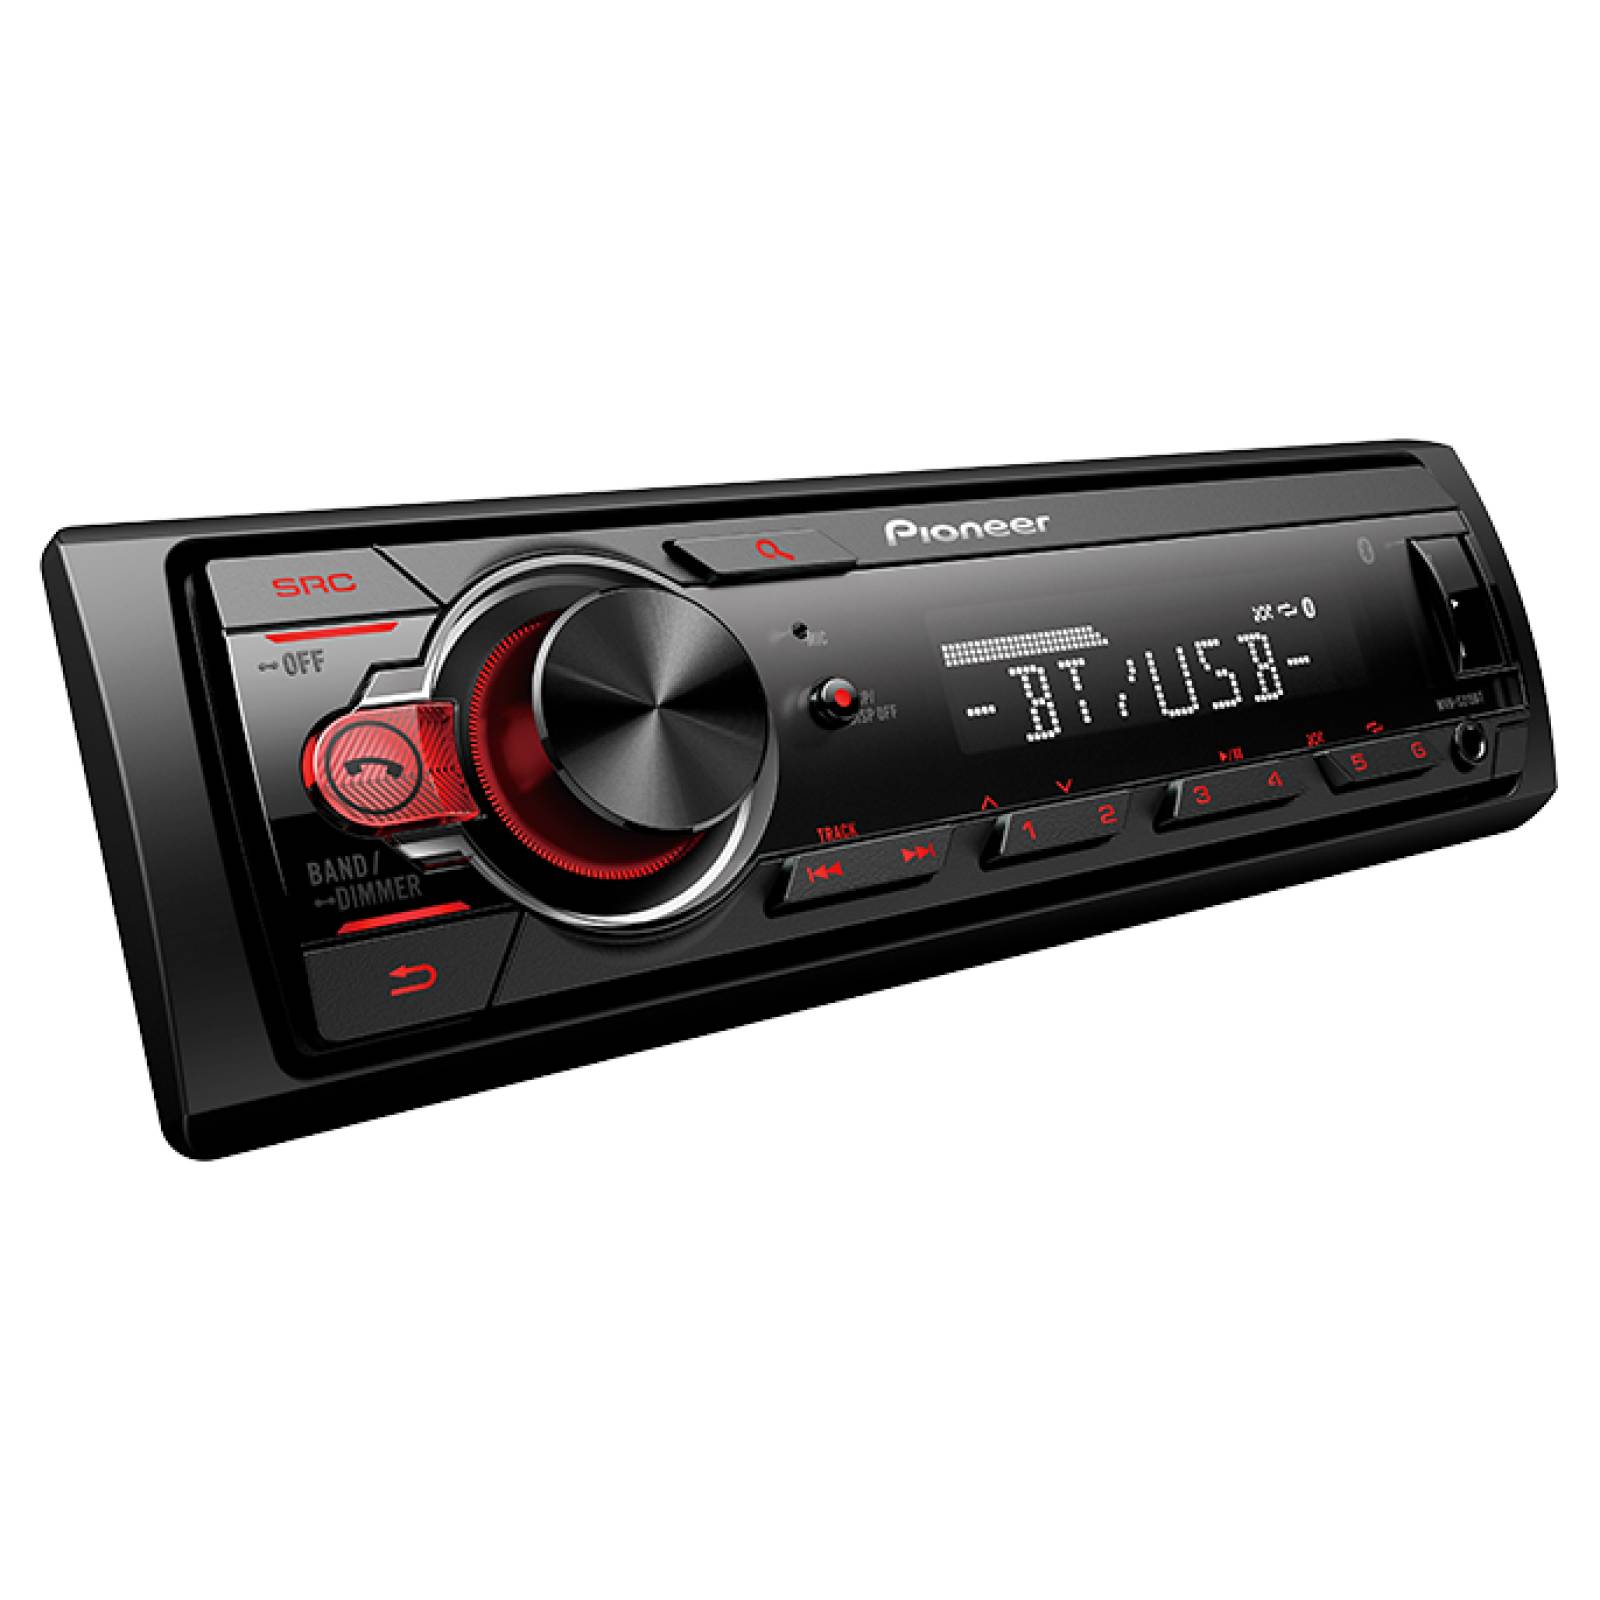 AUTOESTEREO PIONEER MVH-S215BT BLUETOOTH USB AUX ANDROID 